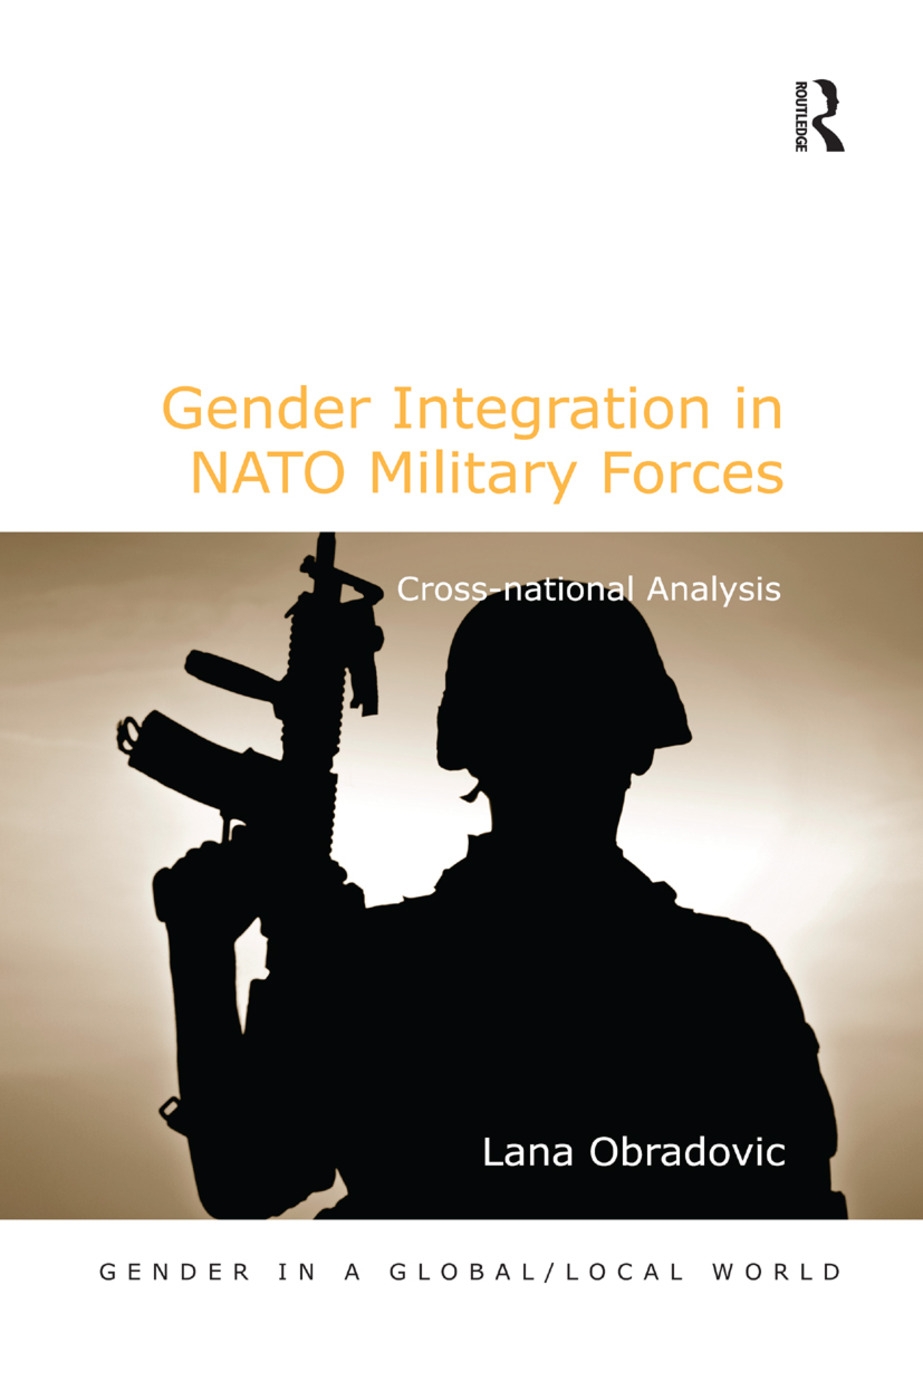 Gender Integration in NATO Military Forces: Cross-National Analysis. by Lana Obradovic